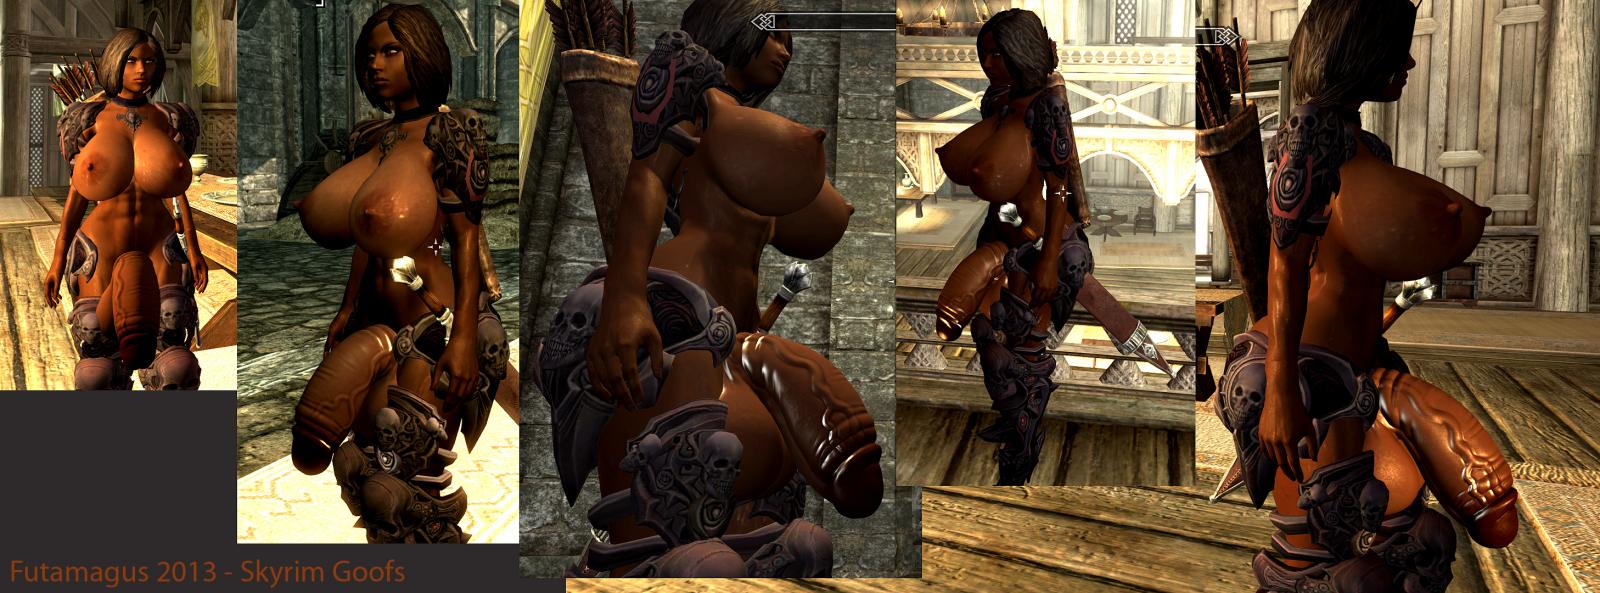 anyone have the link of this Futa mod? 